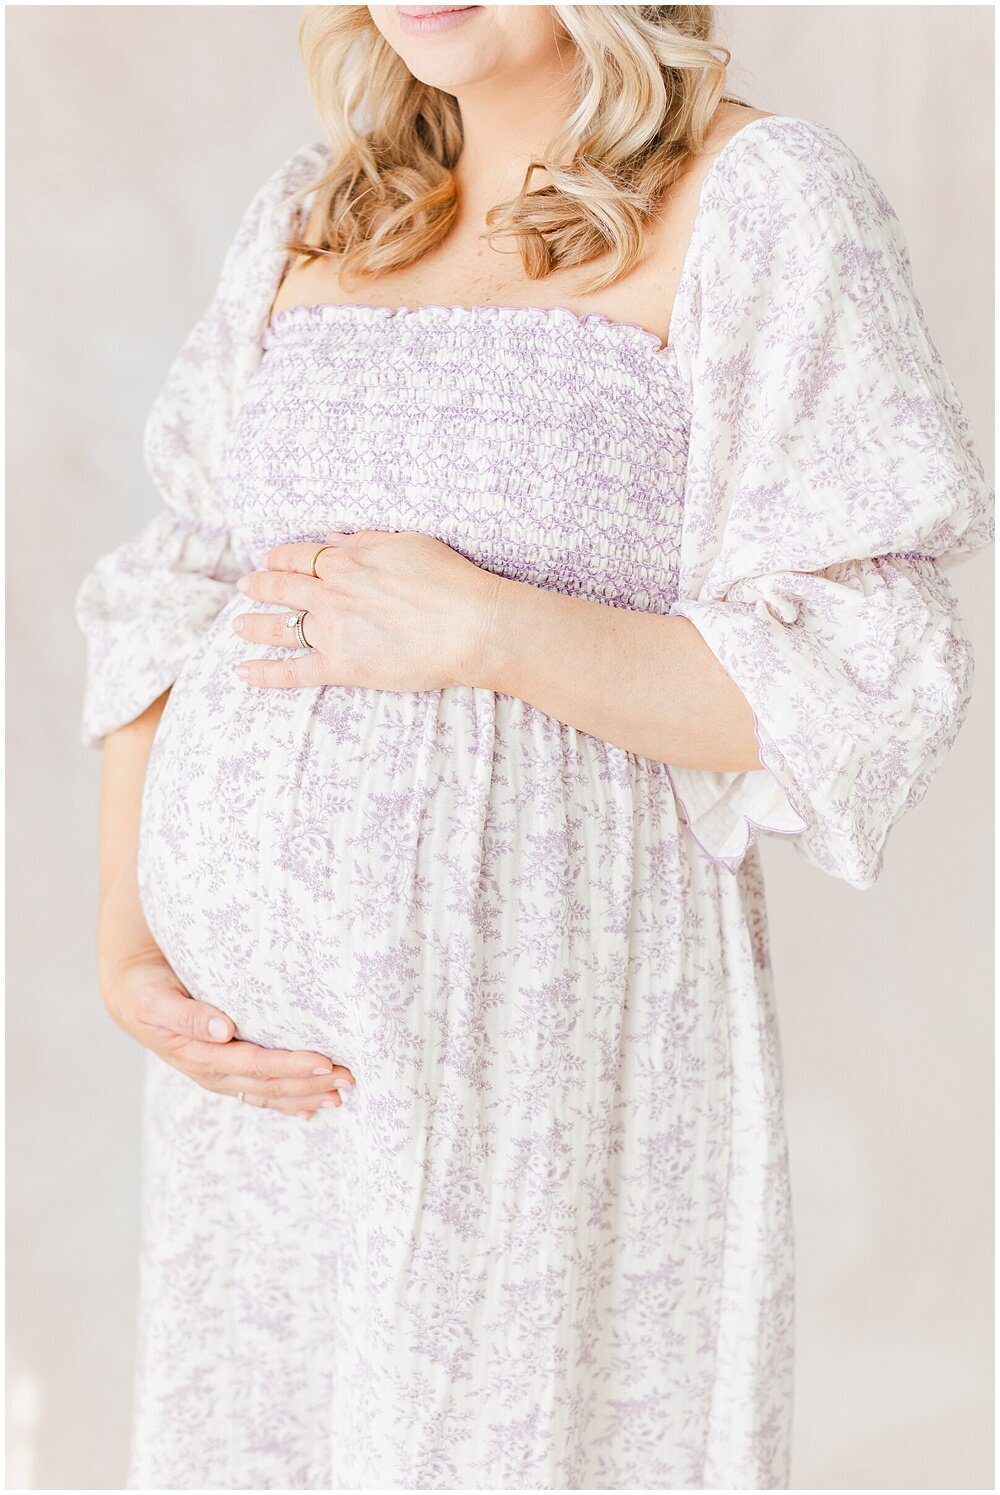 A pregnant mother holding her pregnant belly in front of a hand-painted canvas backdrop by northern virginia newborn photographer